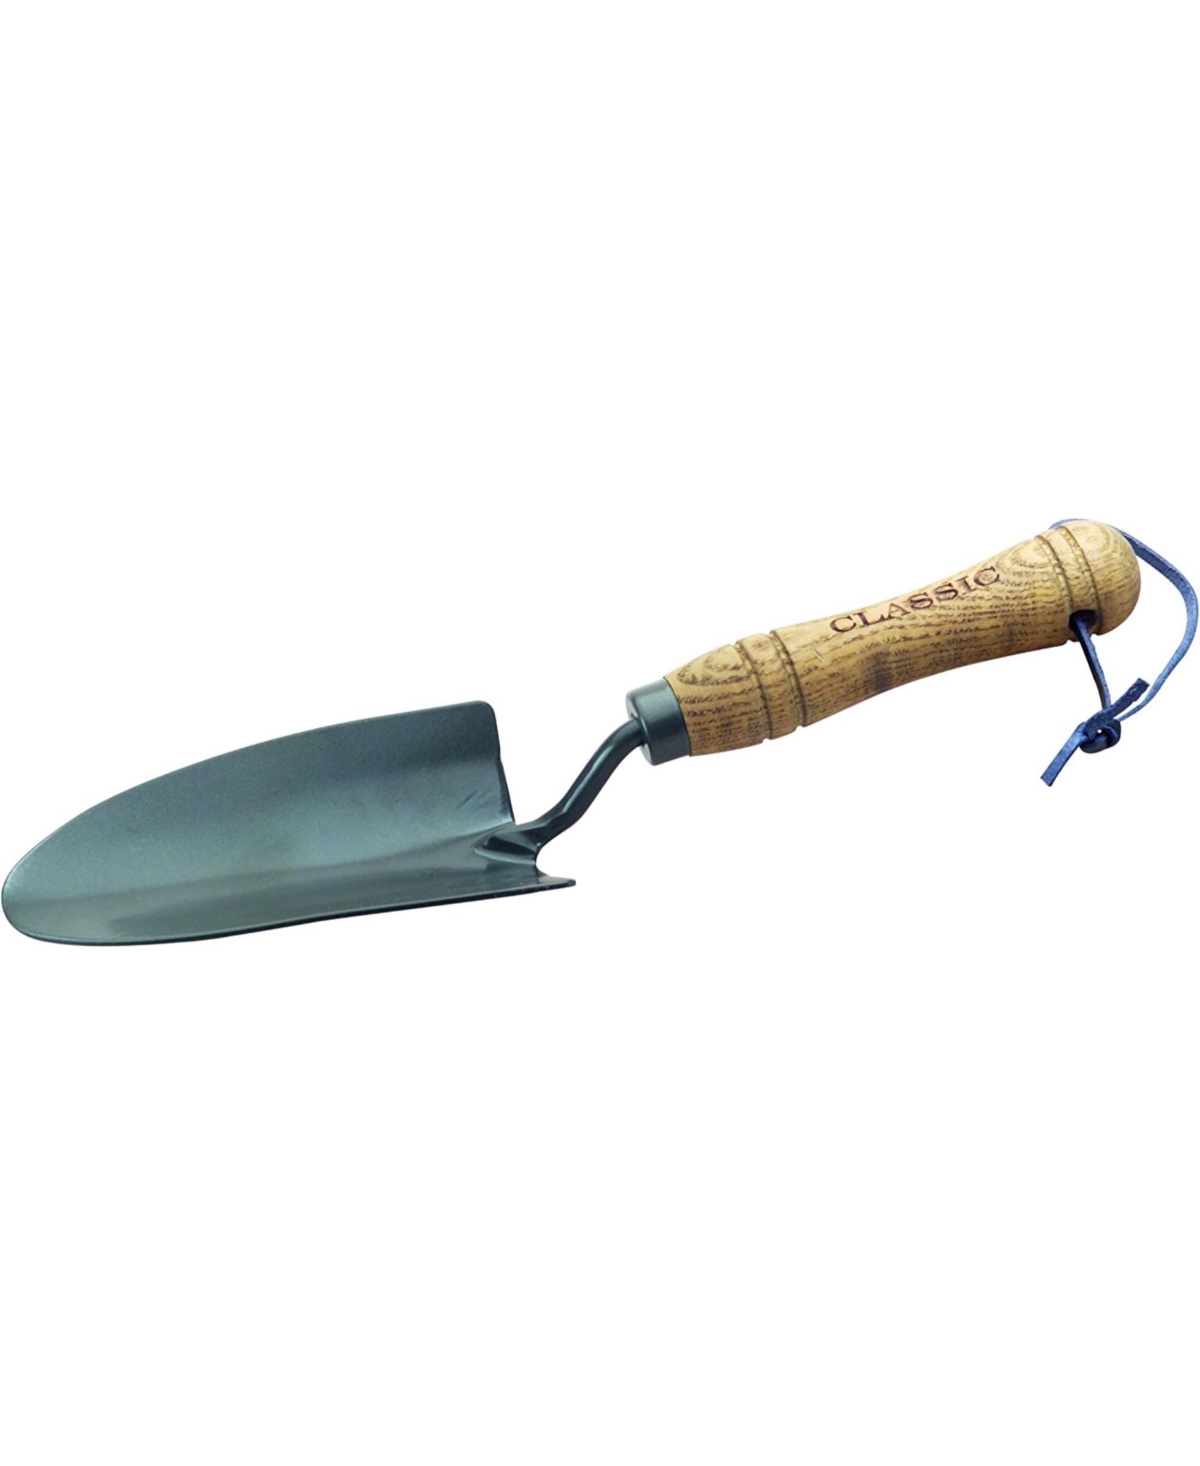 Classic Hand Trowel with Steel Blades and Wooden Handle - Multi